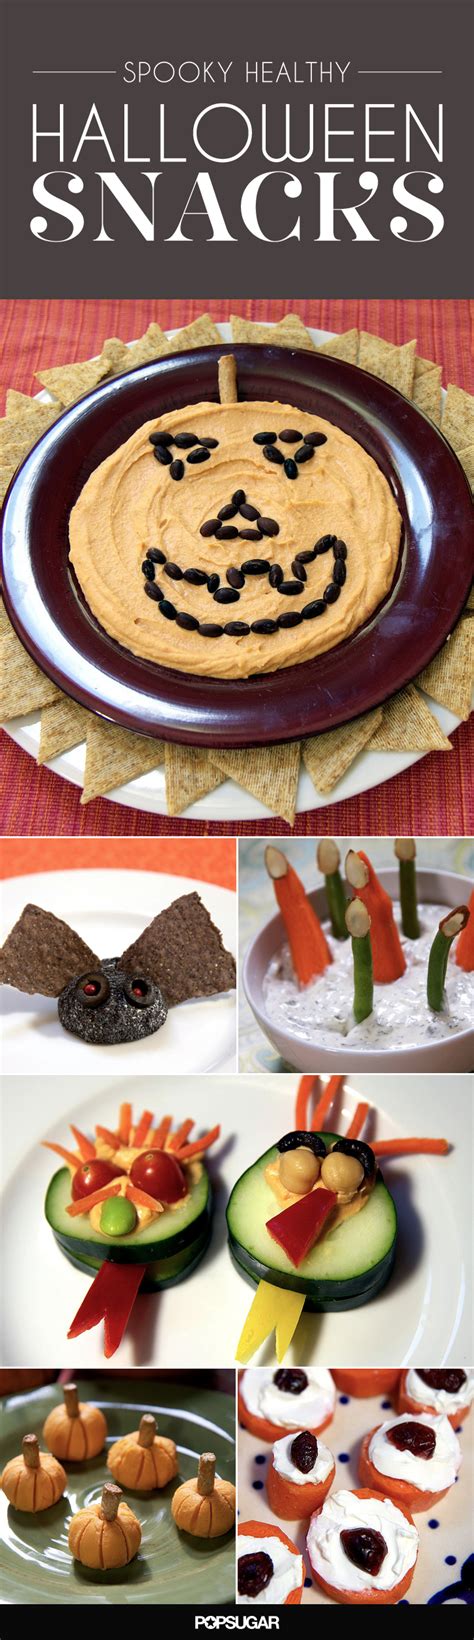 Eat right with planters · dessert inspired mixes · the nutmobile Spooky Healthy Halloween Appetizers to Scare Away Hunger | Healthy halloween snacks, Healthy ...